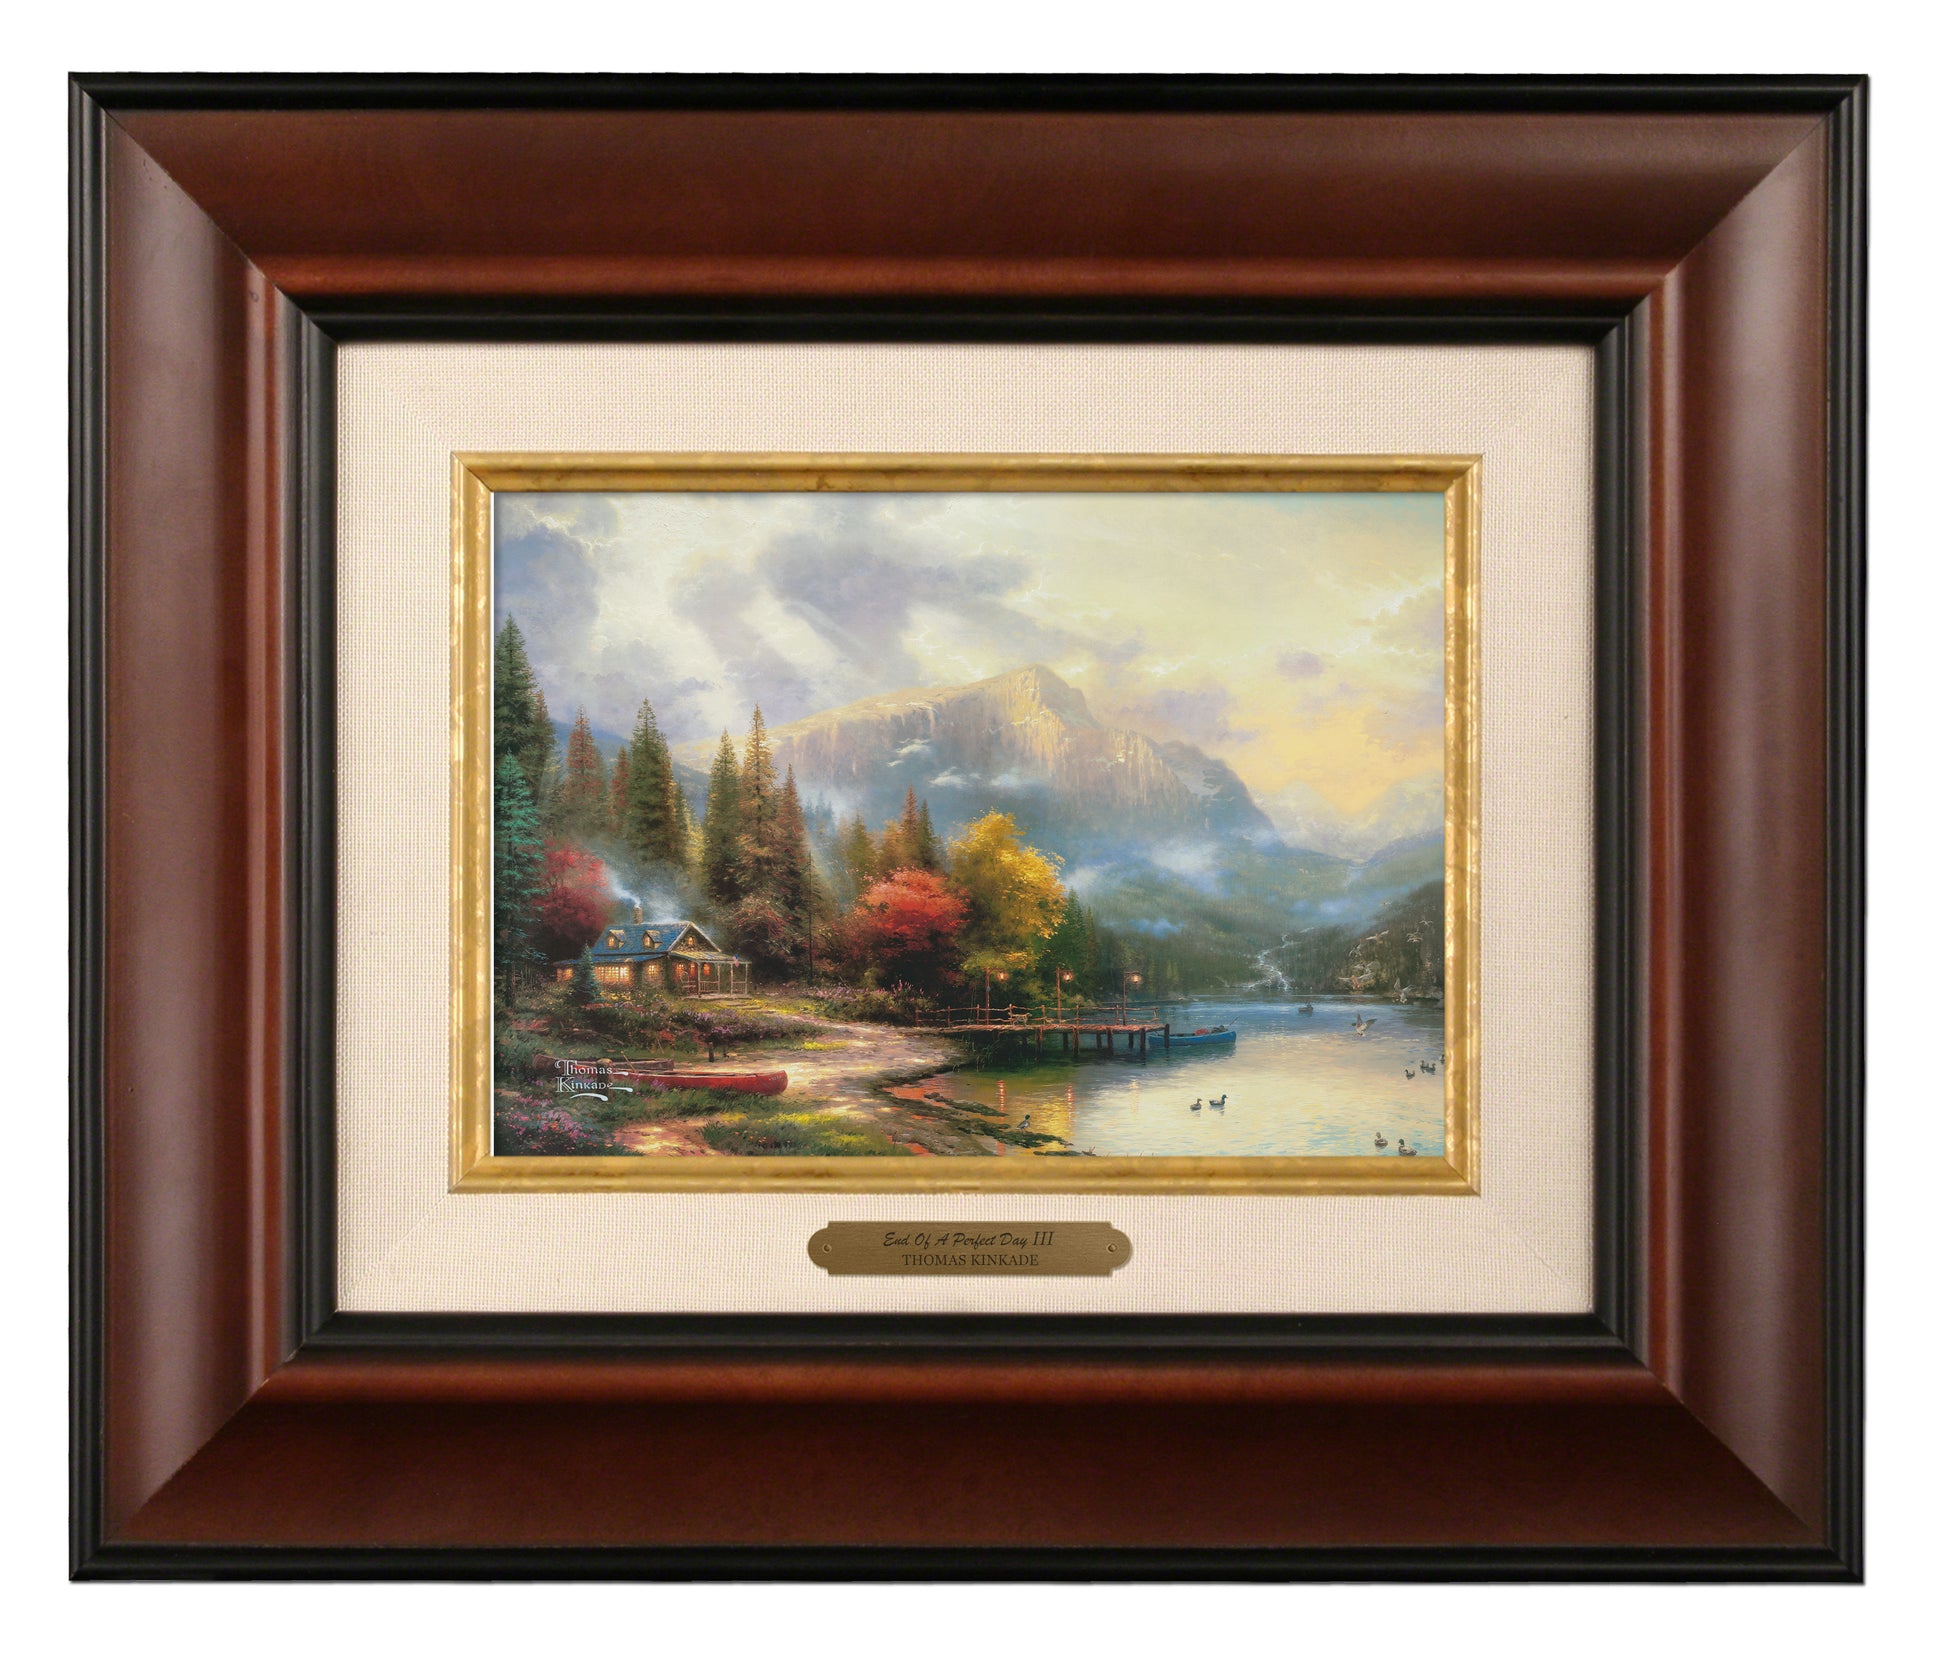 161949_BRW End Of A Perfect Day III 5X7 - Burl Frame.jpg